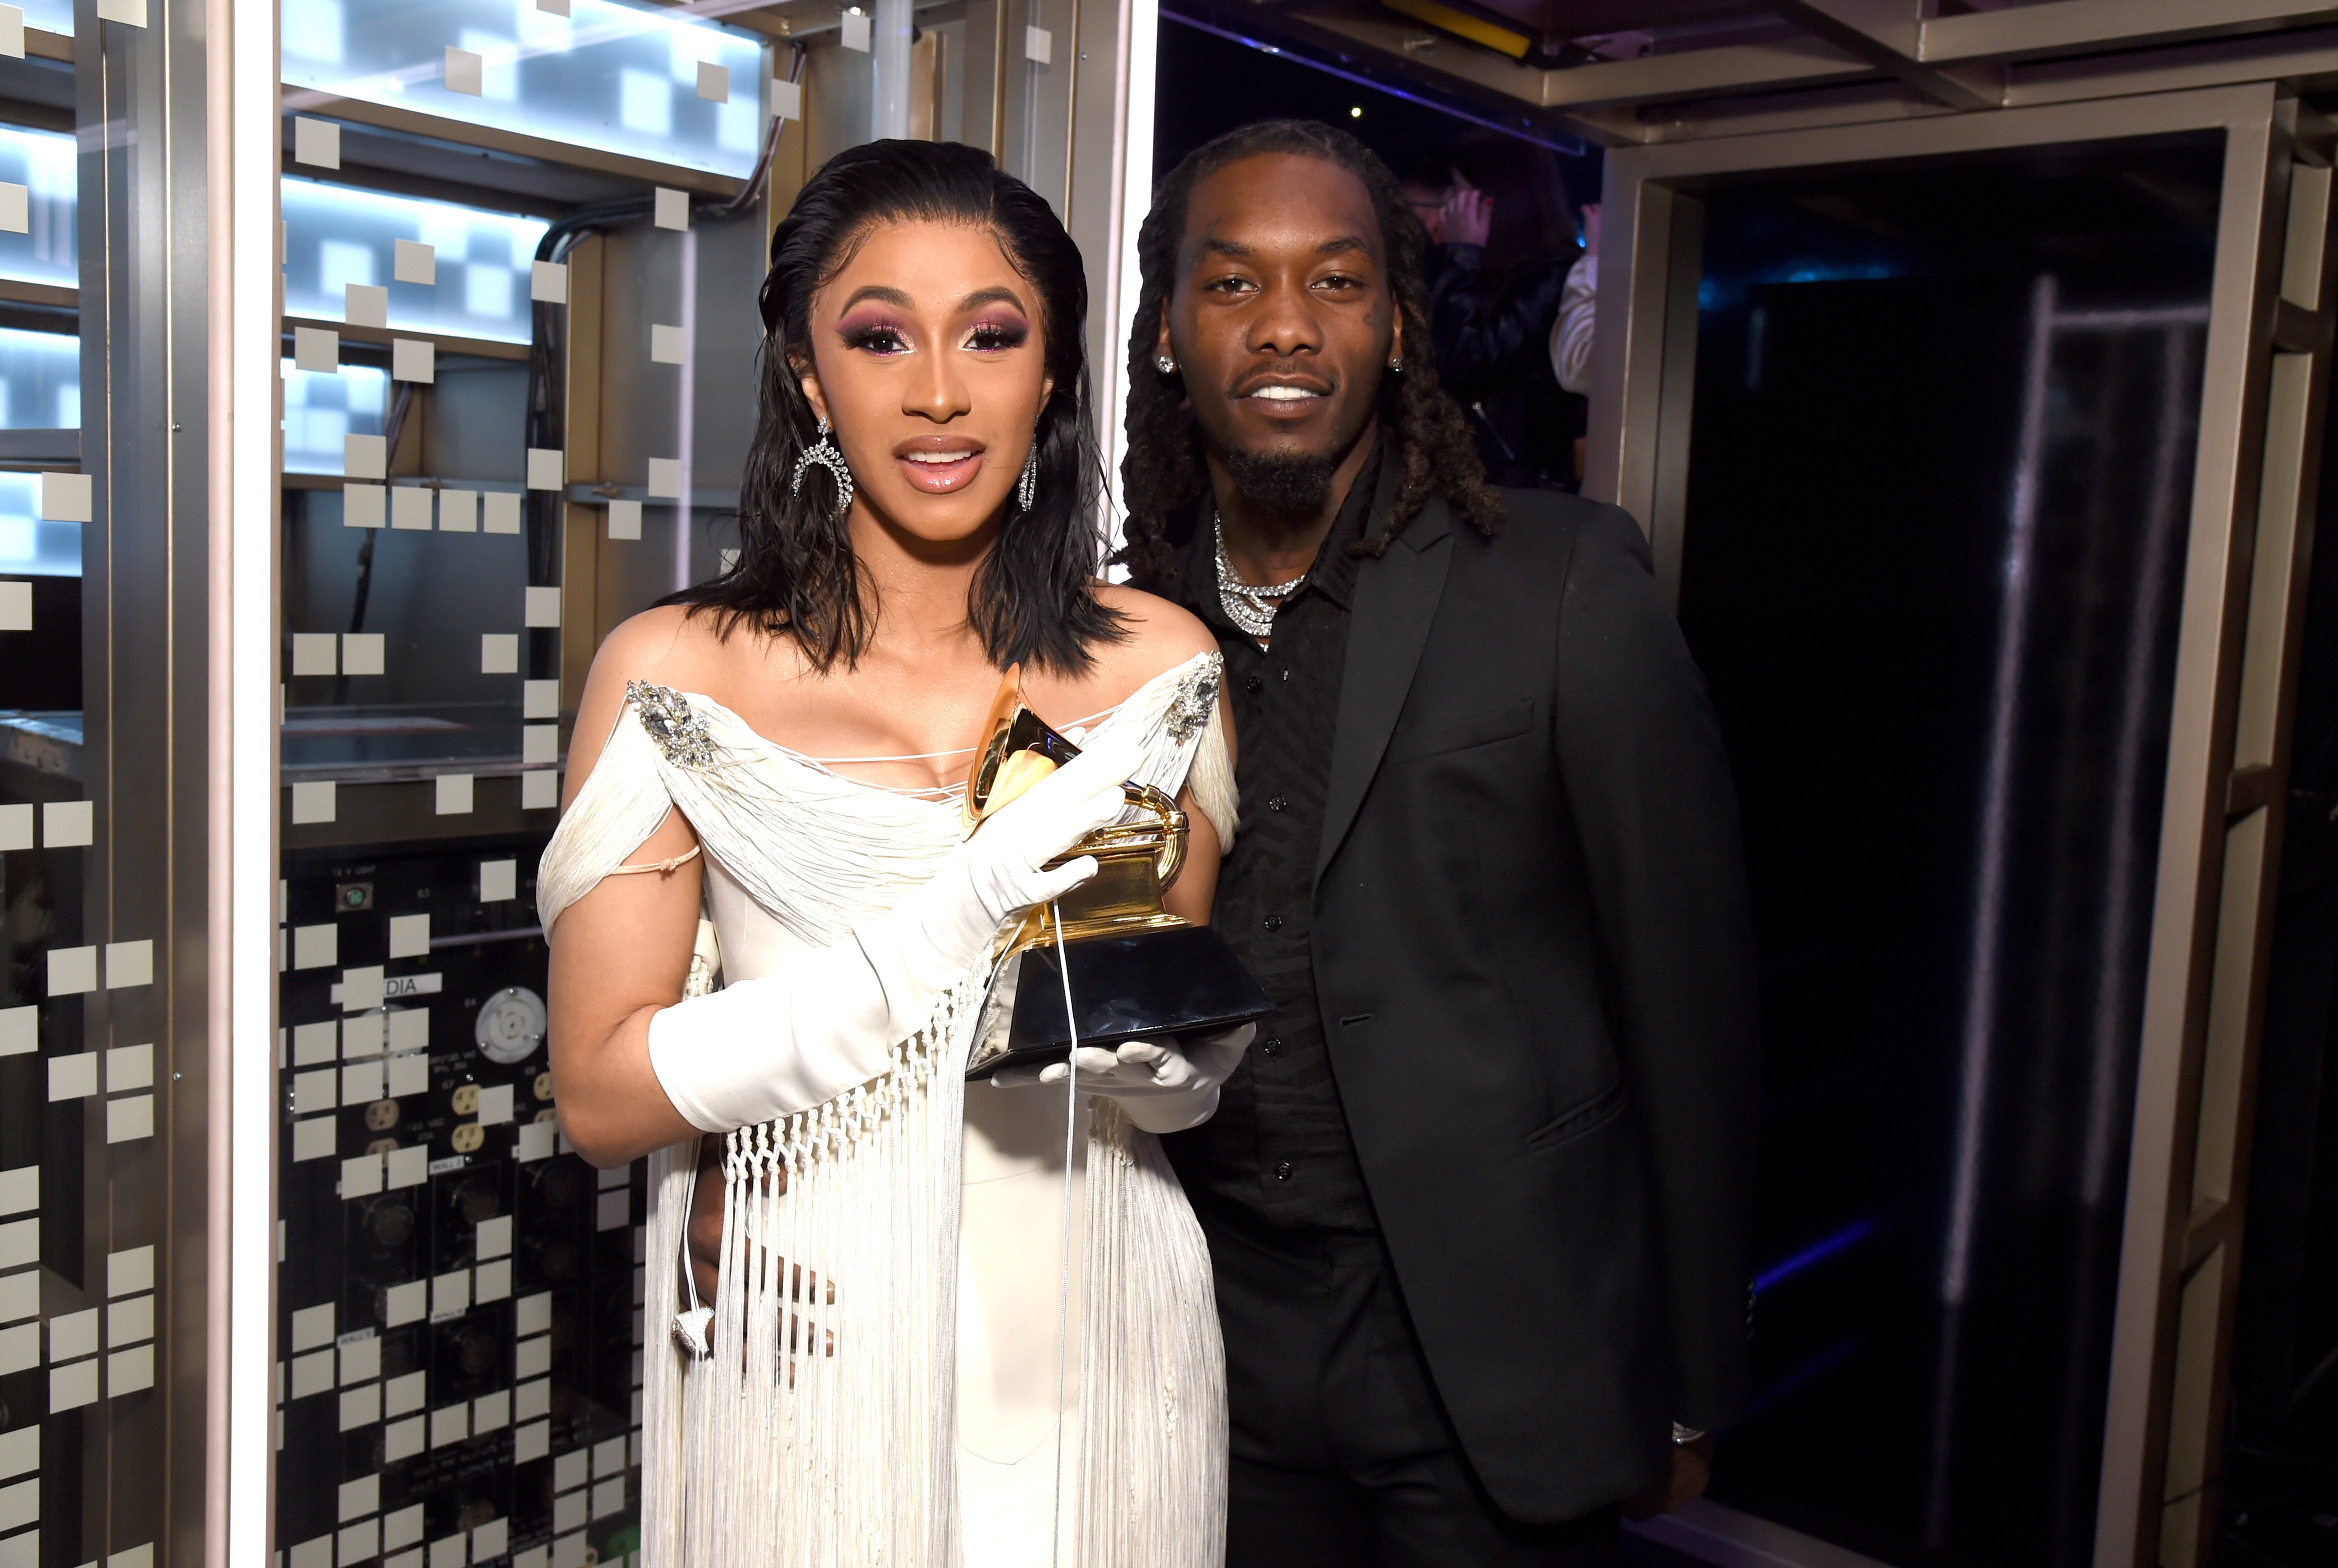 Cardi B and Offset pose backstage at the 61st Annual Grammy Awards, 2019 in Los Angeles, California | Source: Getty Images